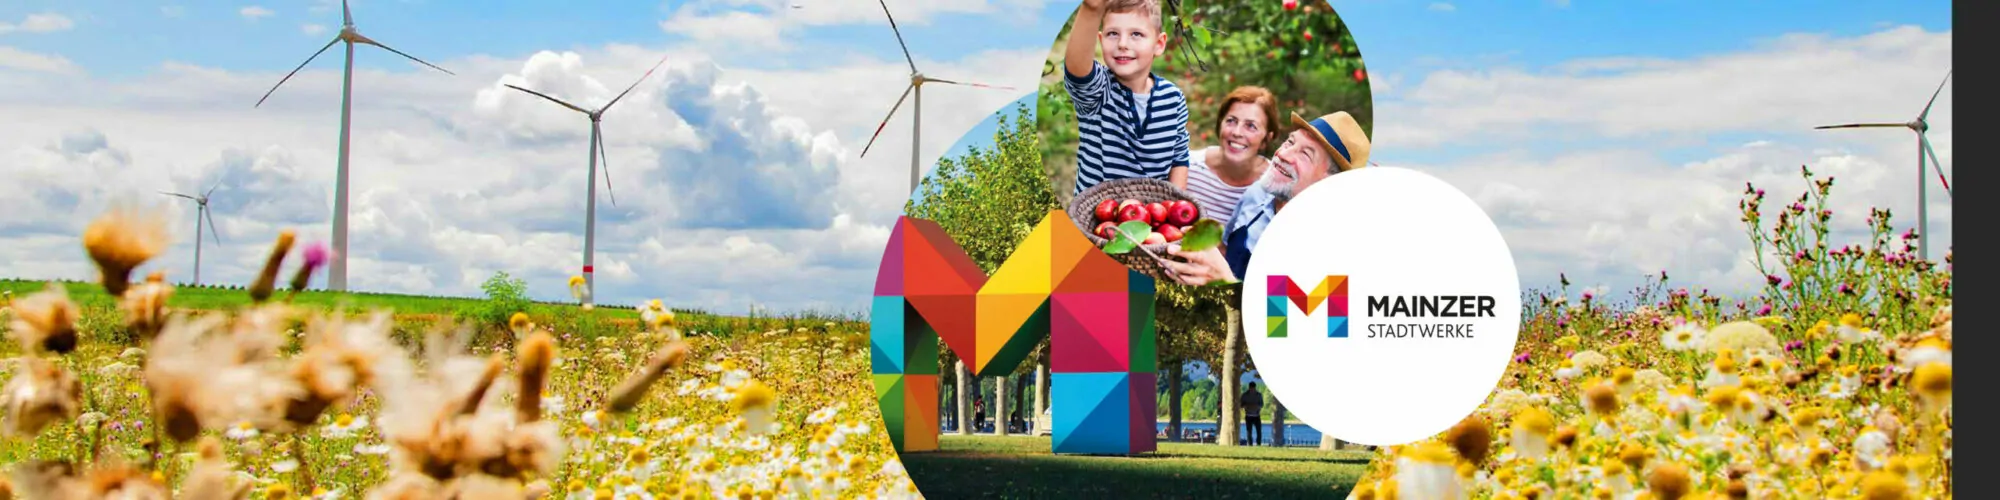 Image of a child picking an apple, wind turbines in the background; Customer Typology for Mainzer Stadtwerke